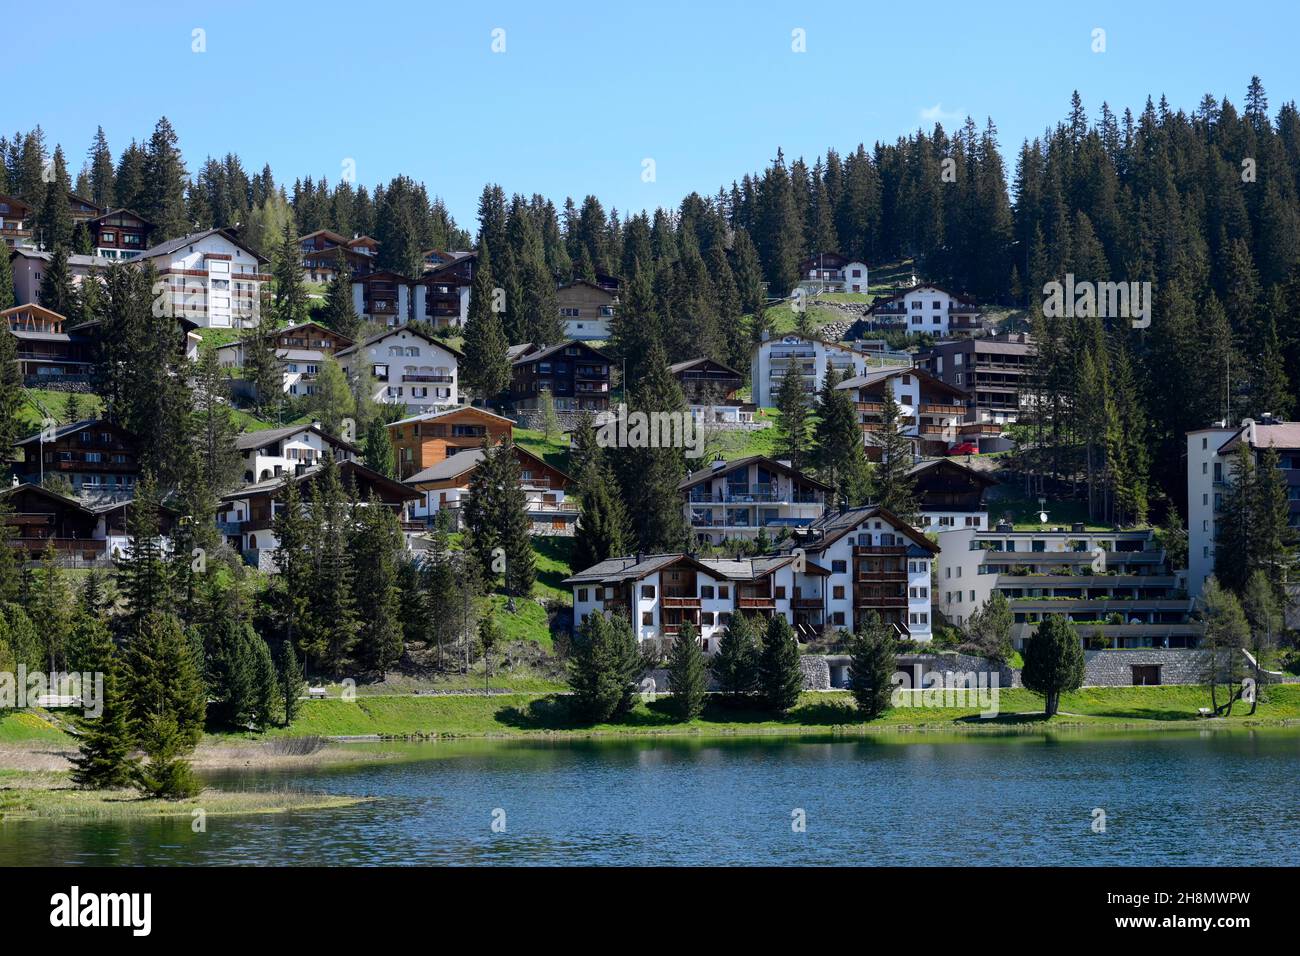 Multi-family houses on a slope with lake access, Arosa, Switzerland Stock Photo